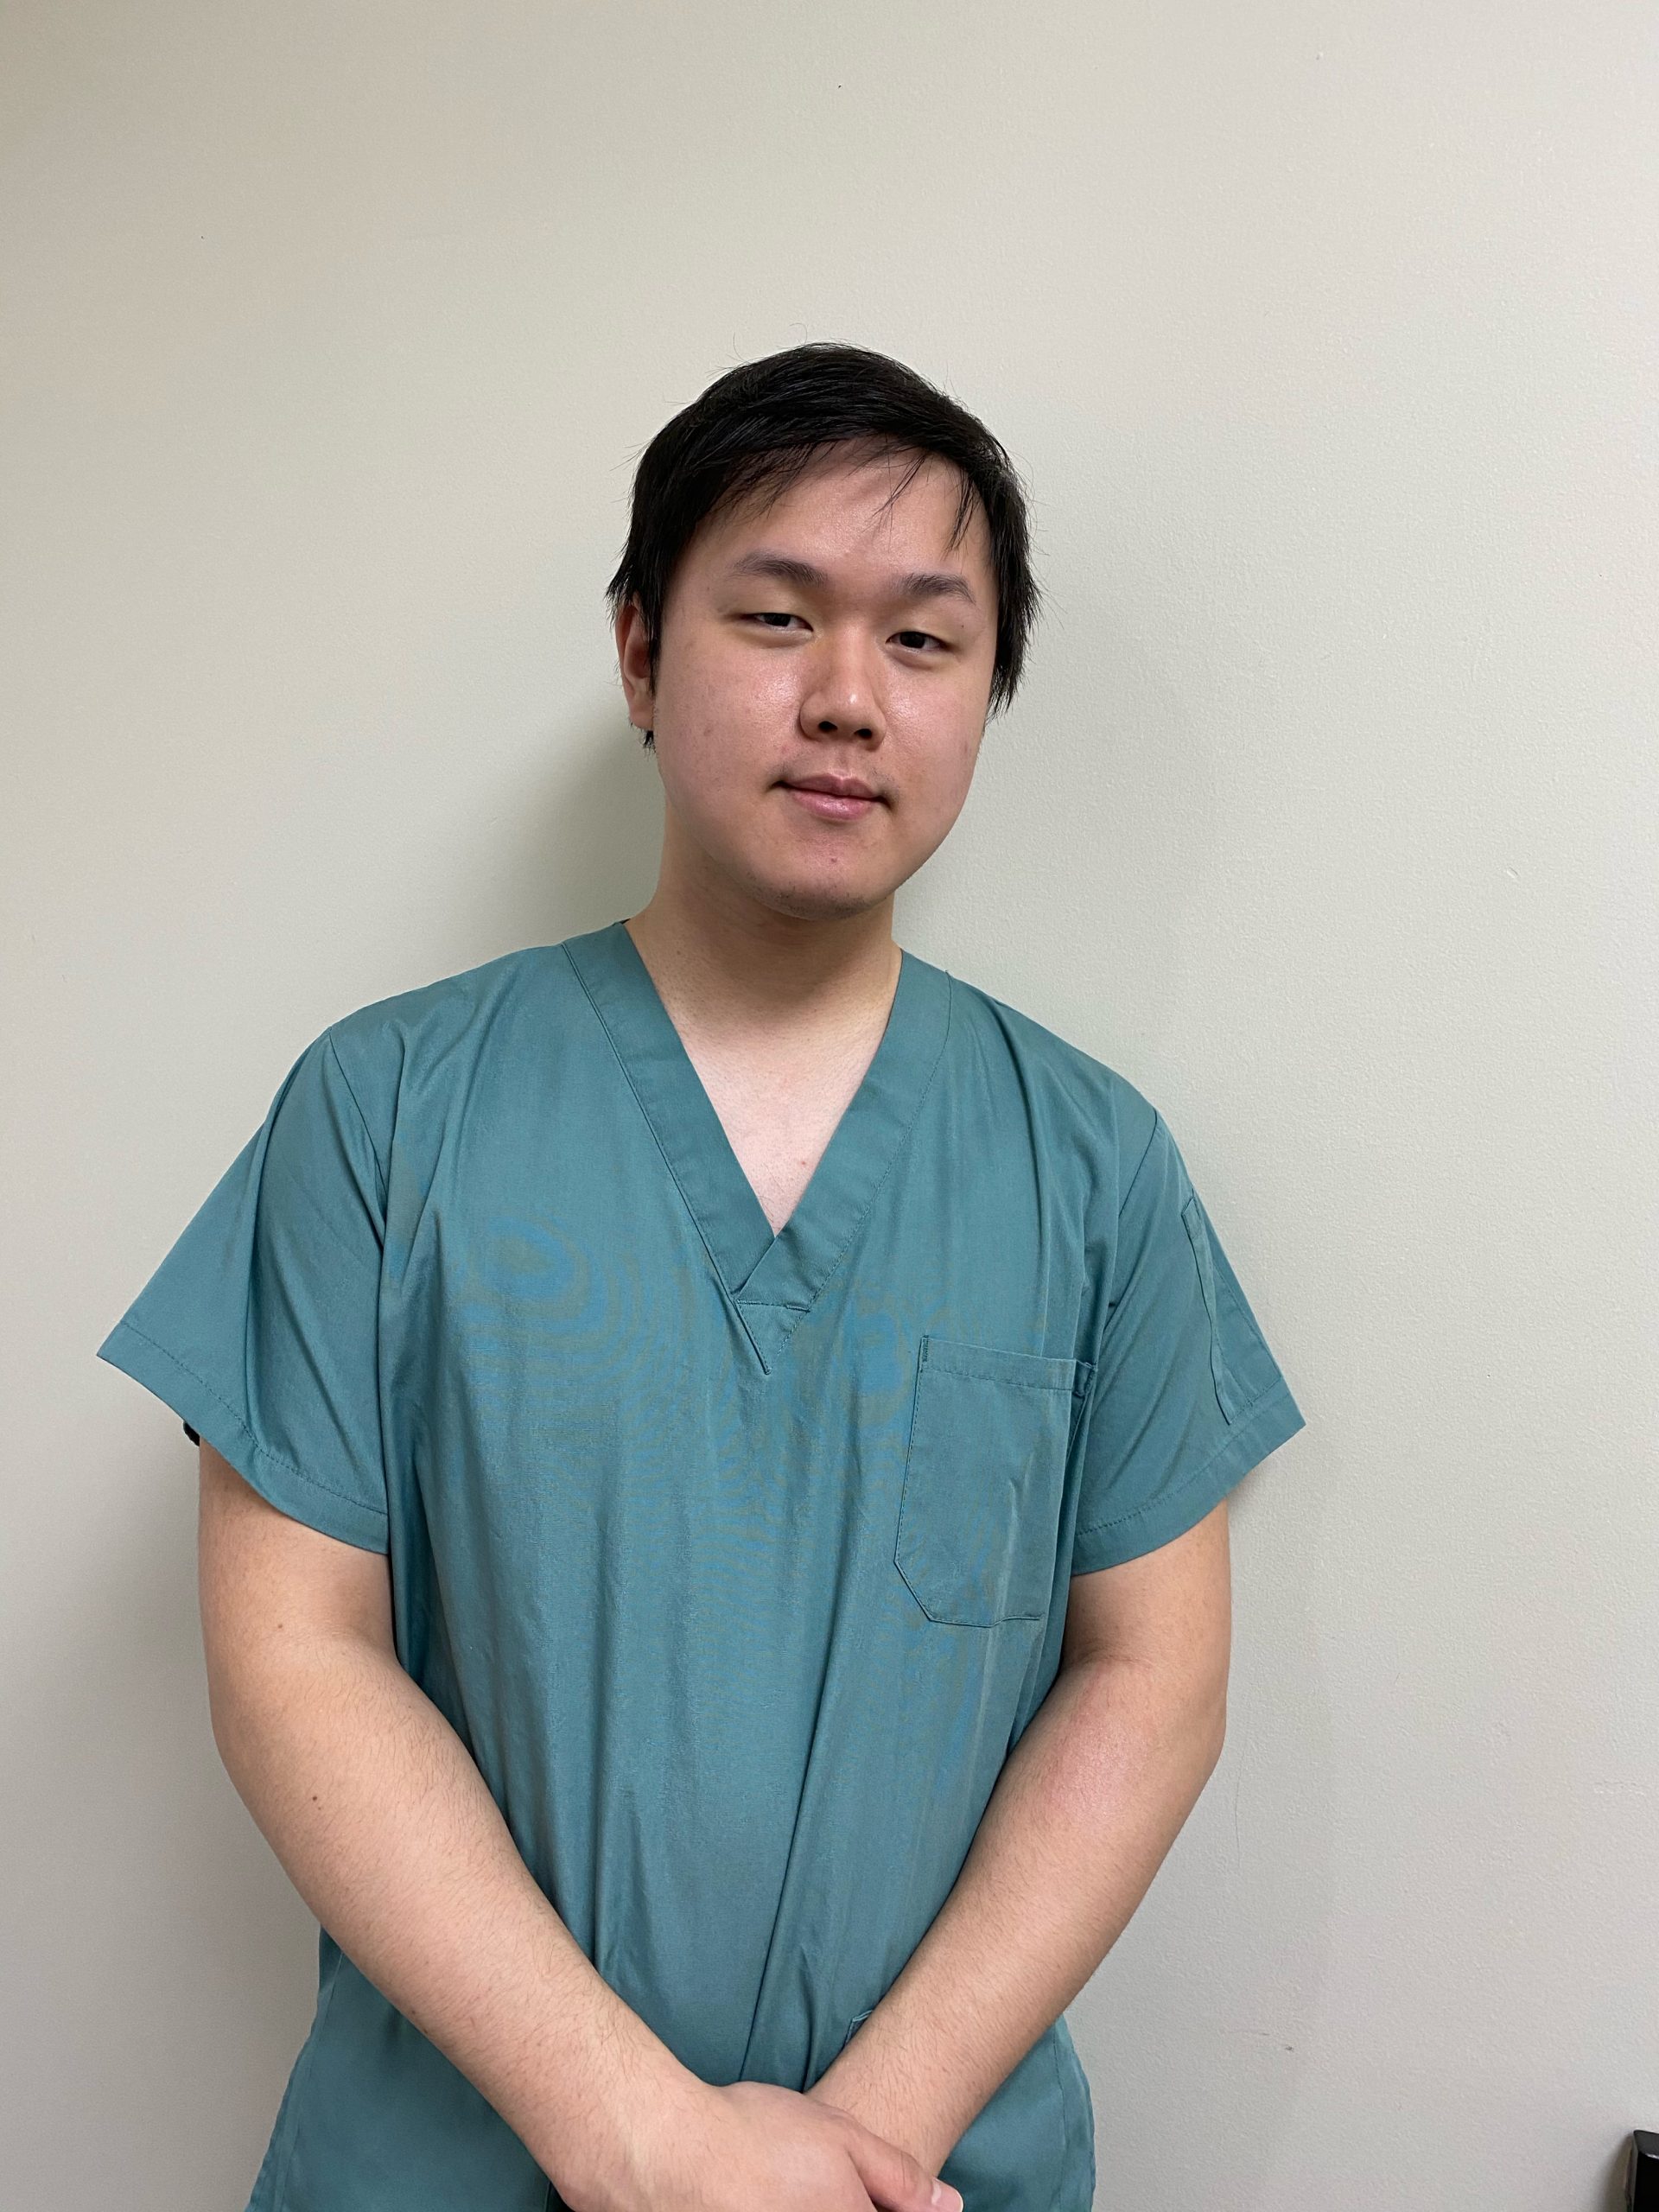 Yuan Li Chang (William) D.Ch. H.B.Sc. joined West Mississauga Foot Clinic as an associated in 2019. He holds an Honors Bachelor of Science from University of Toronto and an advanced graduate diploma in Chiropody from the Michener Institute of Education at UHN.